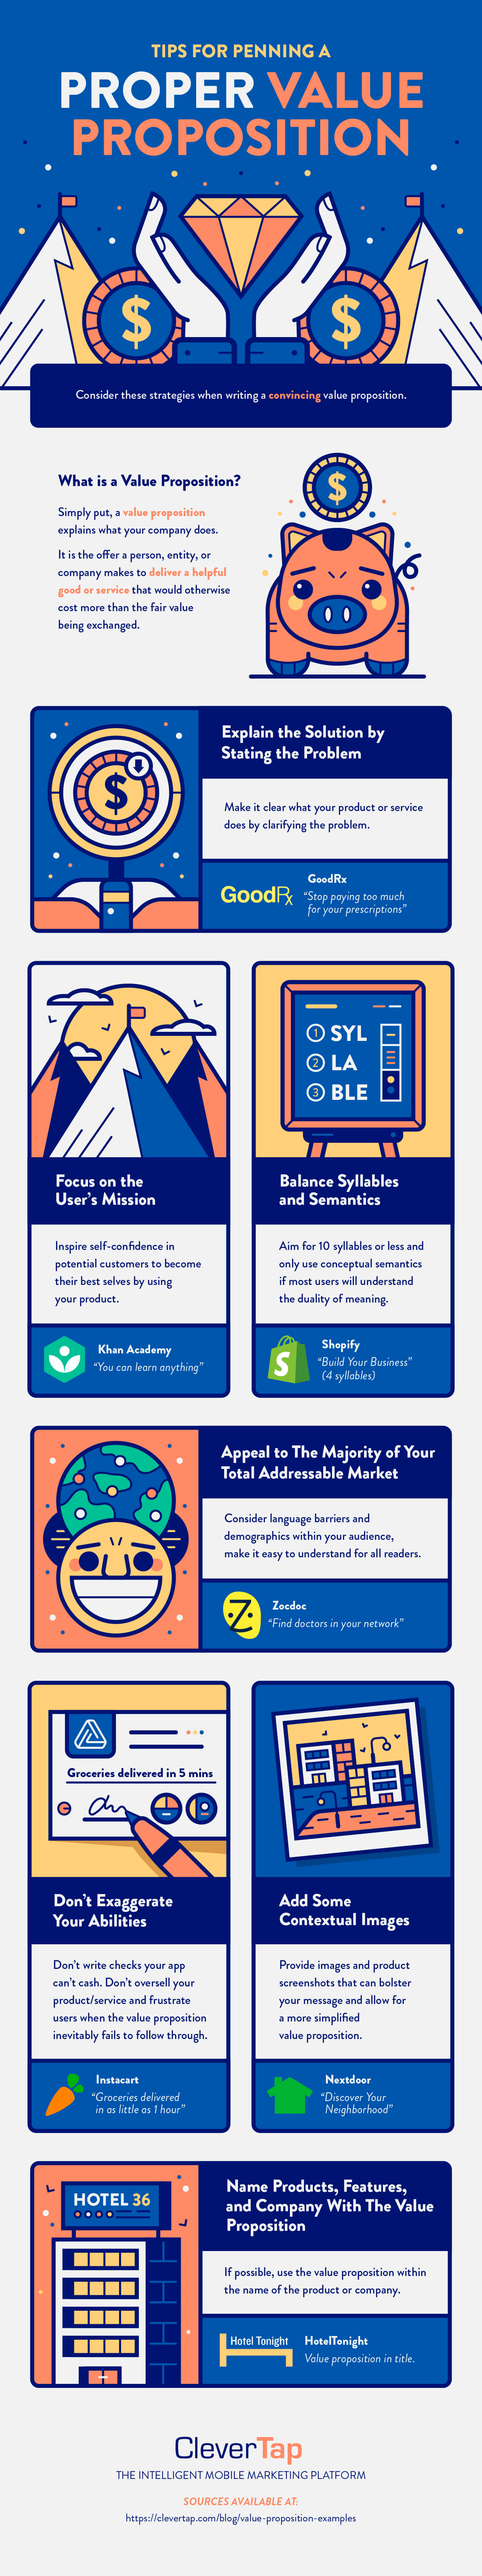 Value Proposition Strategies And Tips [Infographic]